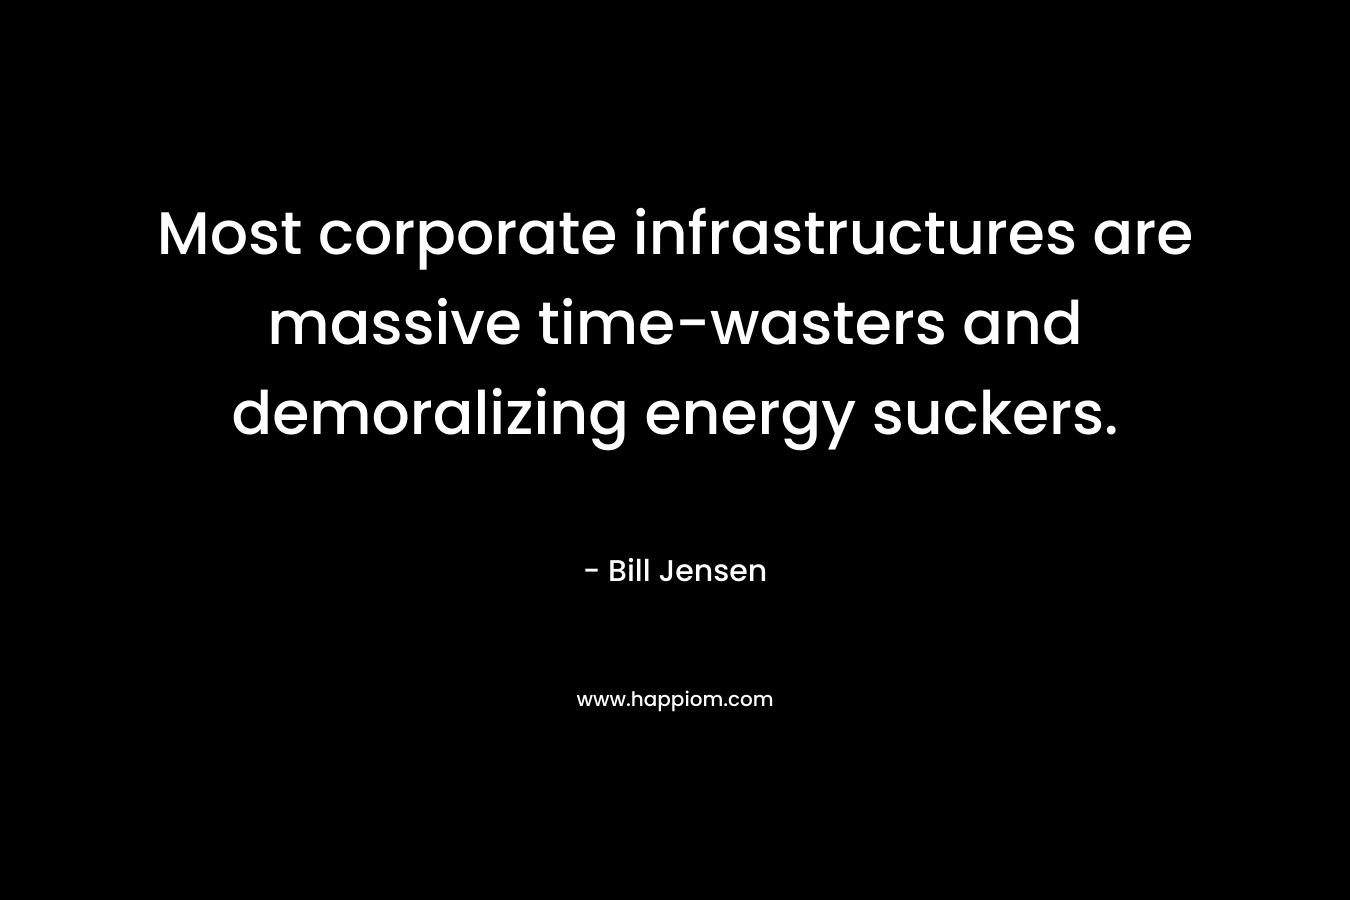 Most corporate infrastructures are massive time-wasters and demoralizing energy suckers. – Bill Jensen